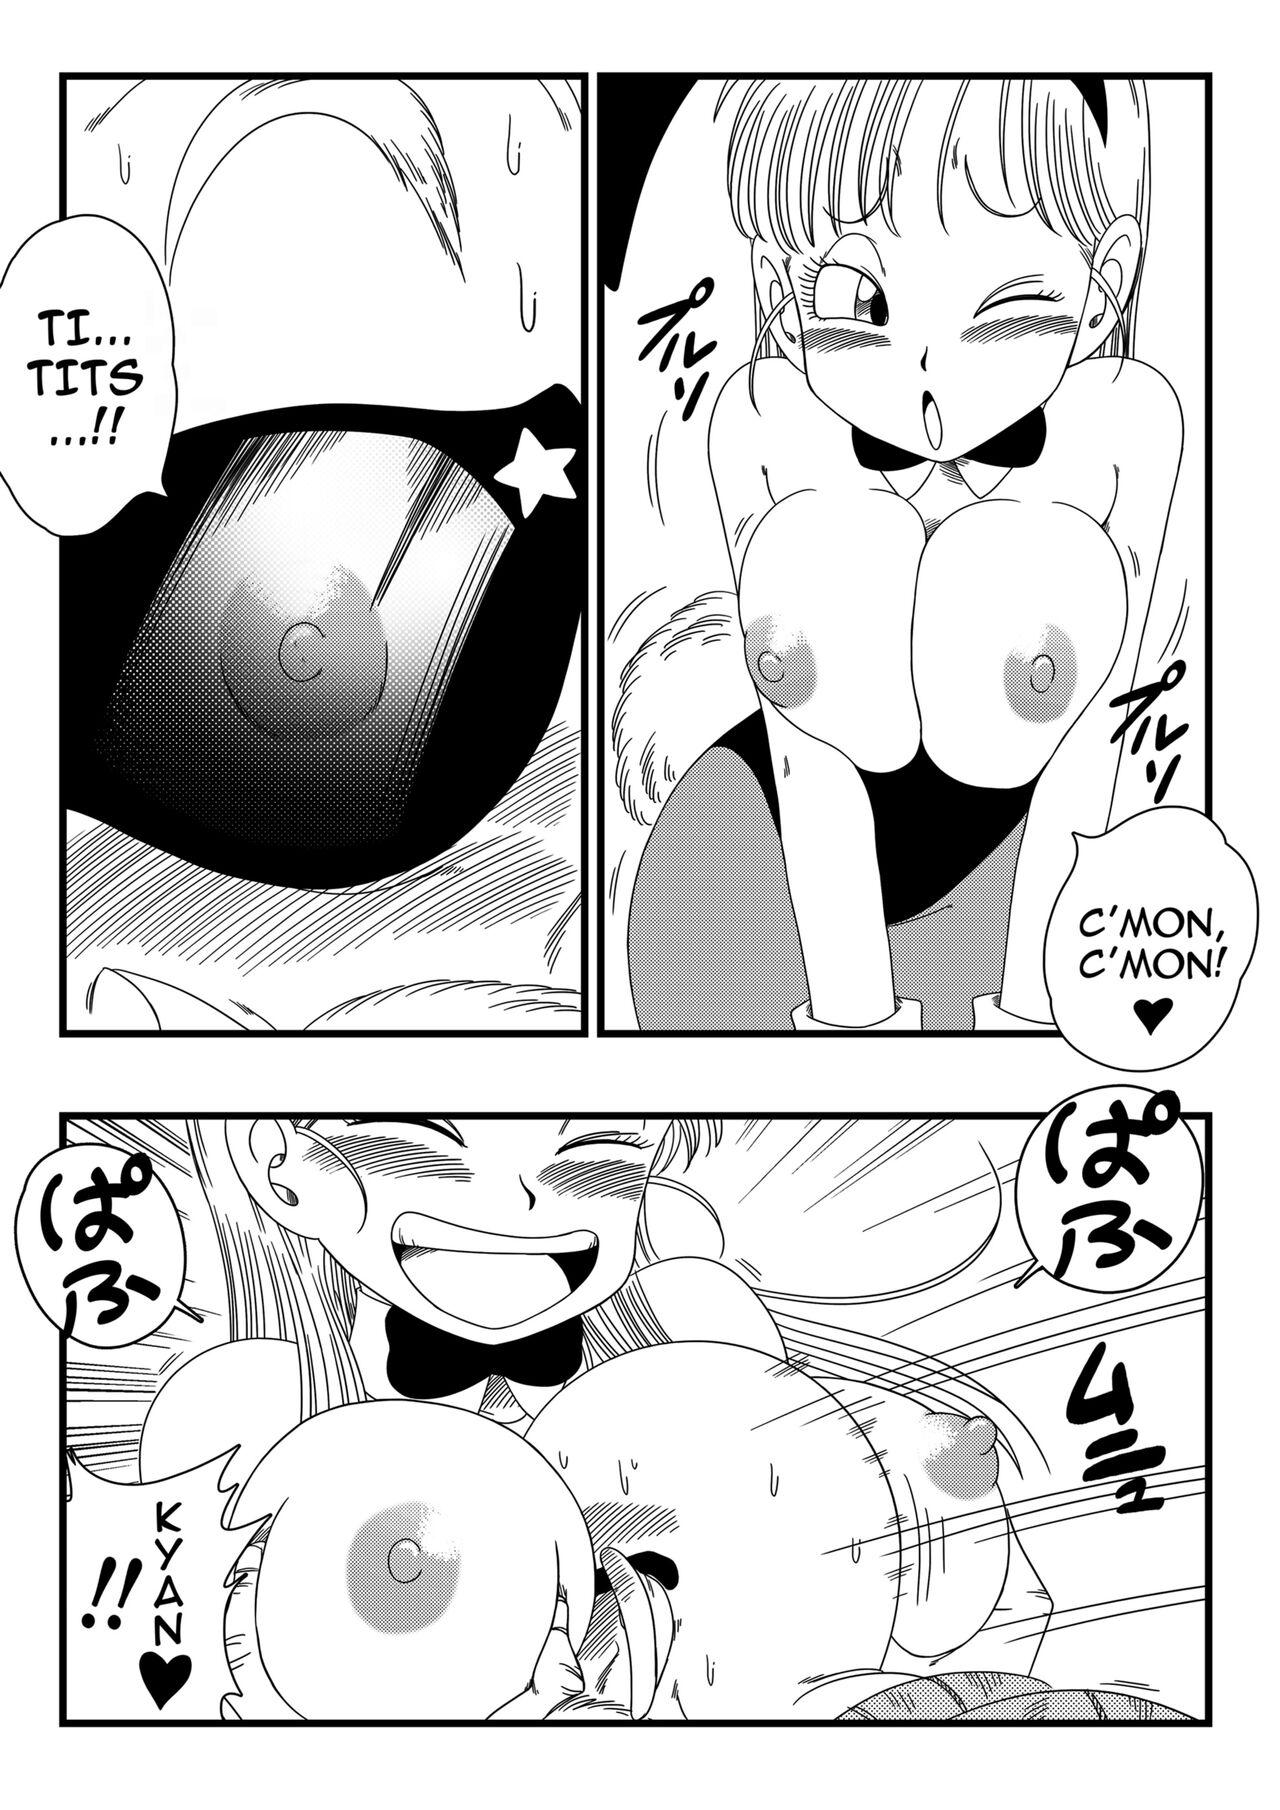 Jerking Bunny Girl Transformation - Dragon ball Whore - Page 9